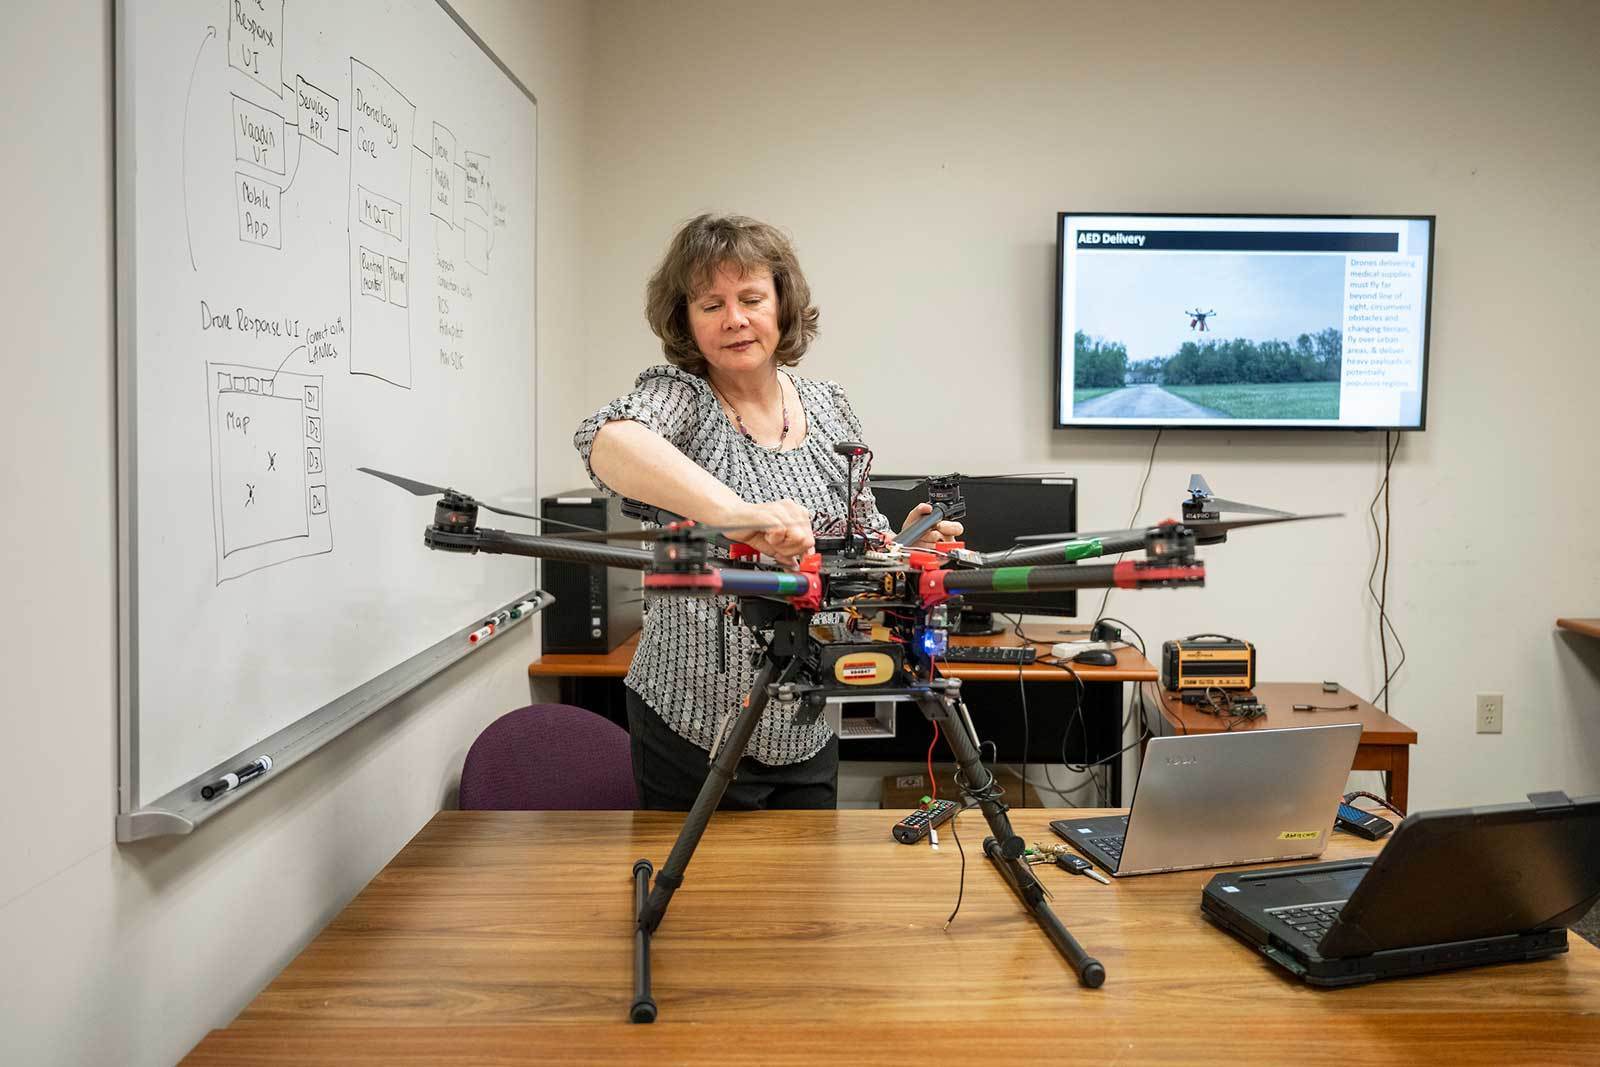 A woman inspects a large drone on a table.